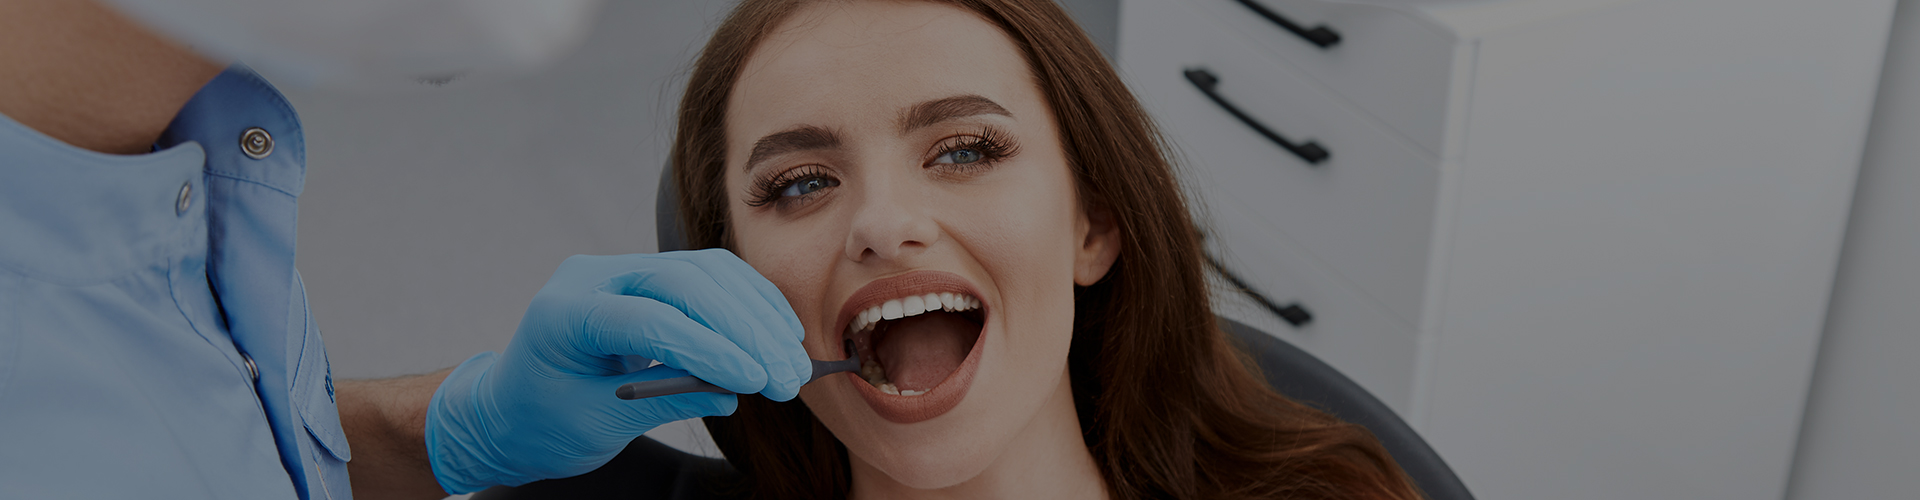 woman smiling no fear in dental chair seeing dentist